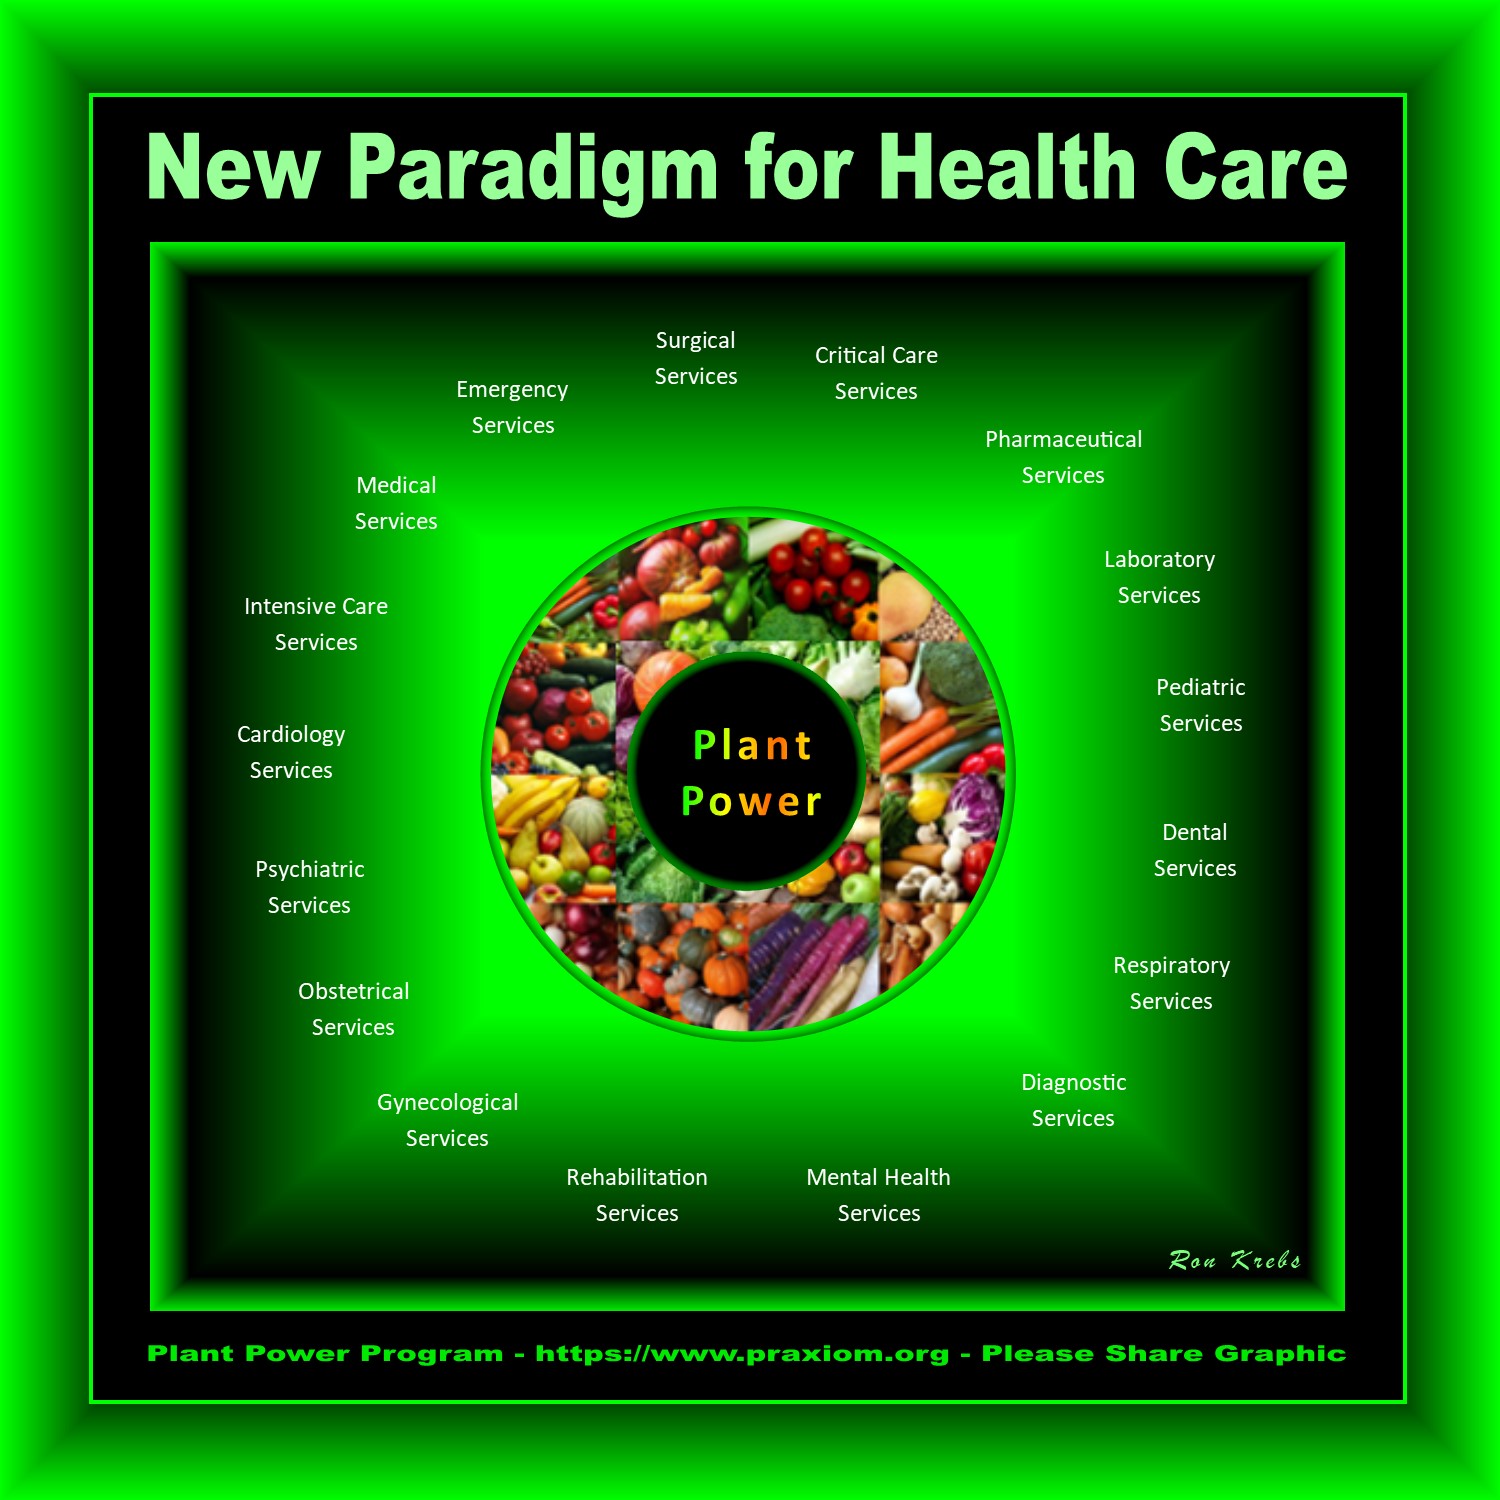 New Paradigm for Health Care Service Delivery - Ron Krebs